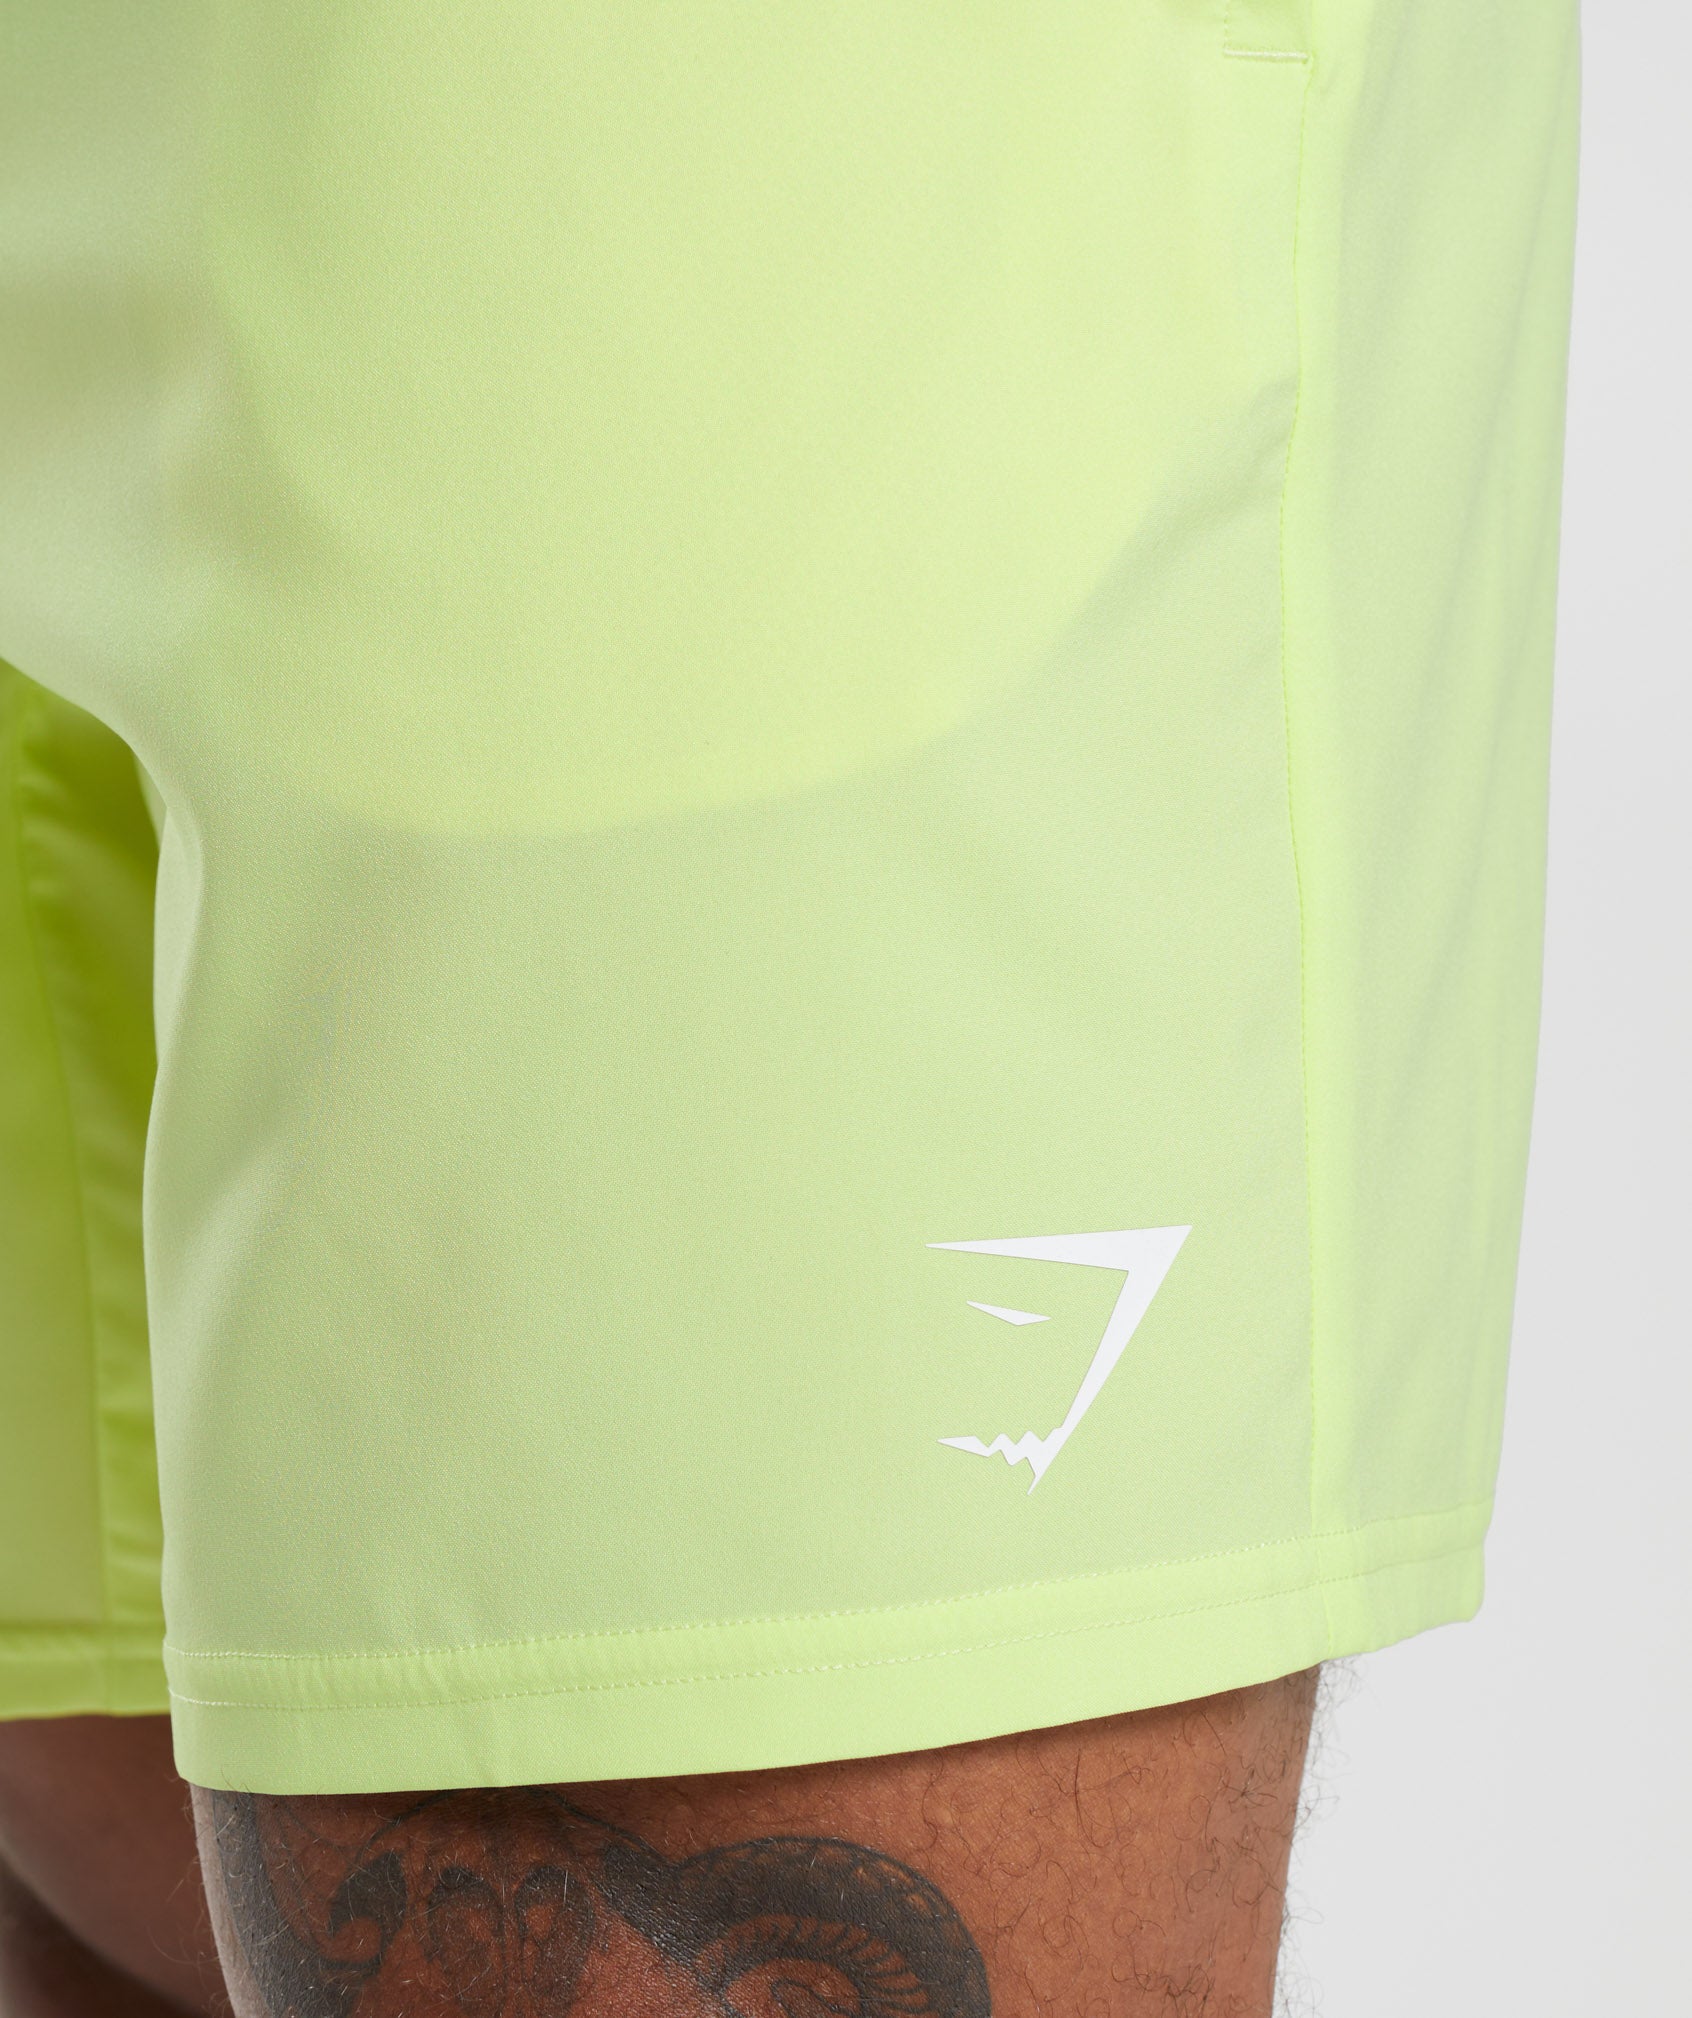 Arrival 7" Shorts in Firefly Green - view 3